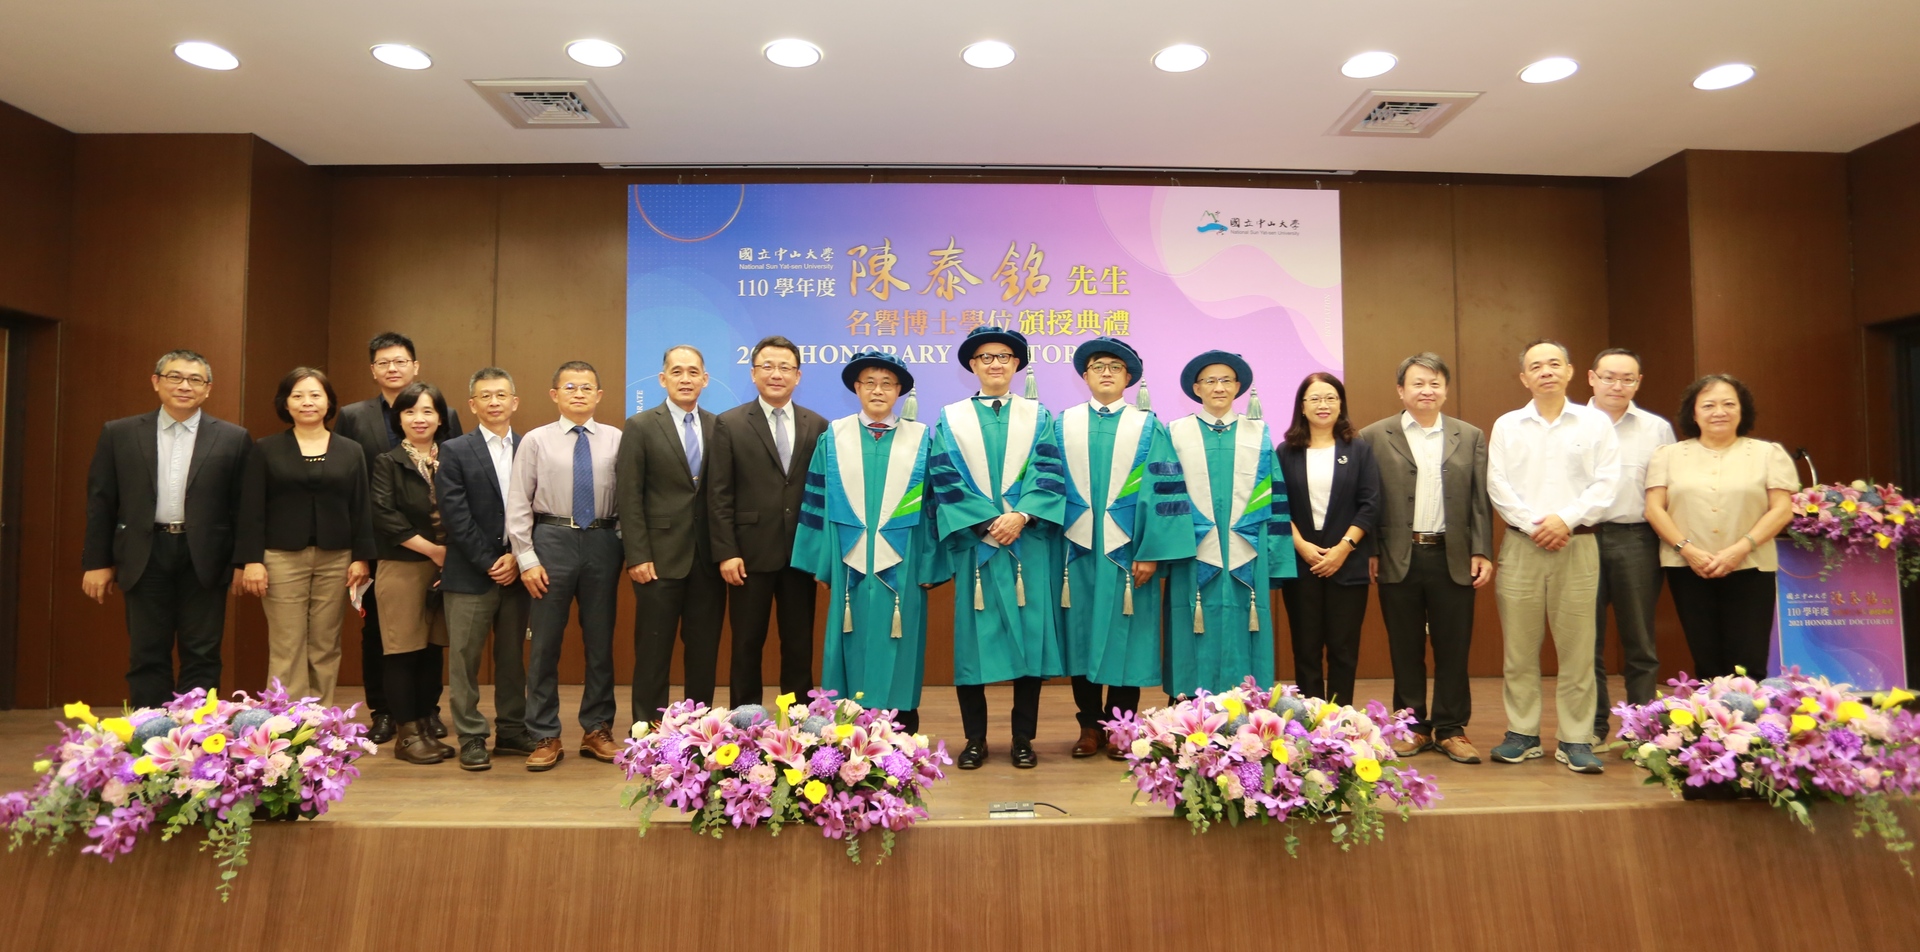 Yageo Chairman Tie-Min Chen awarded Honorary Doctorate in Management